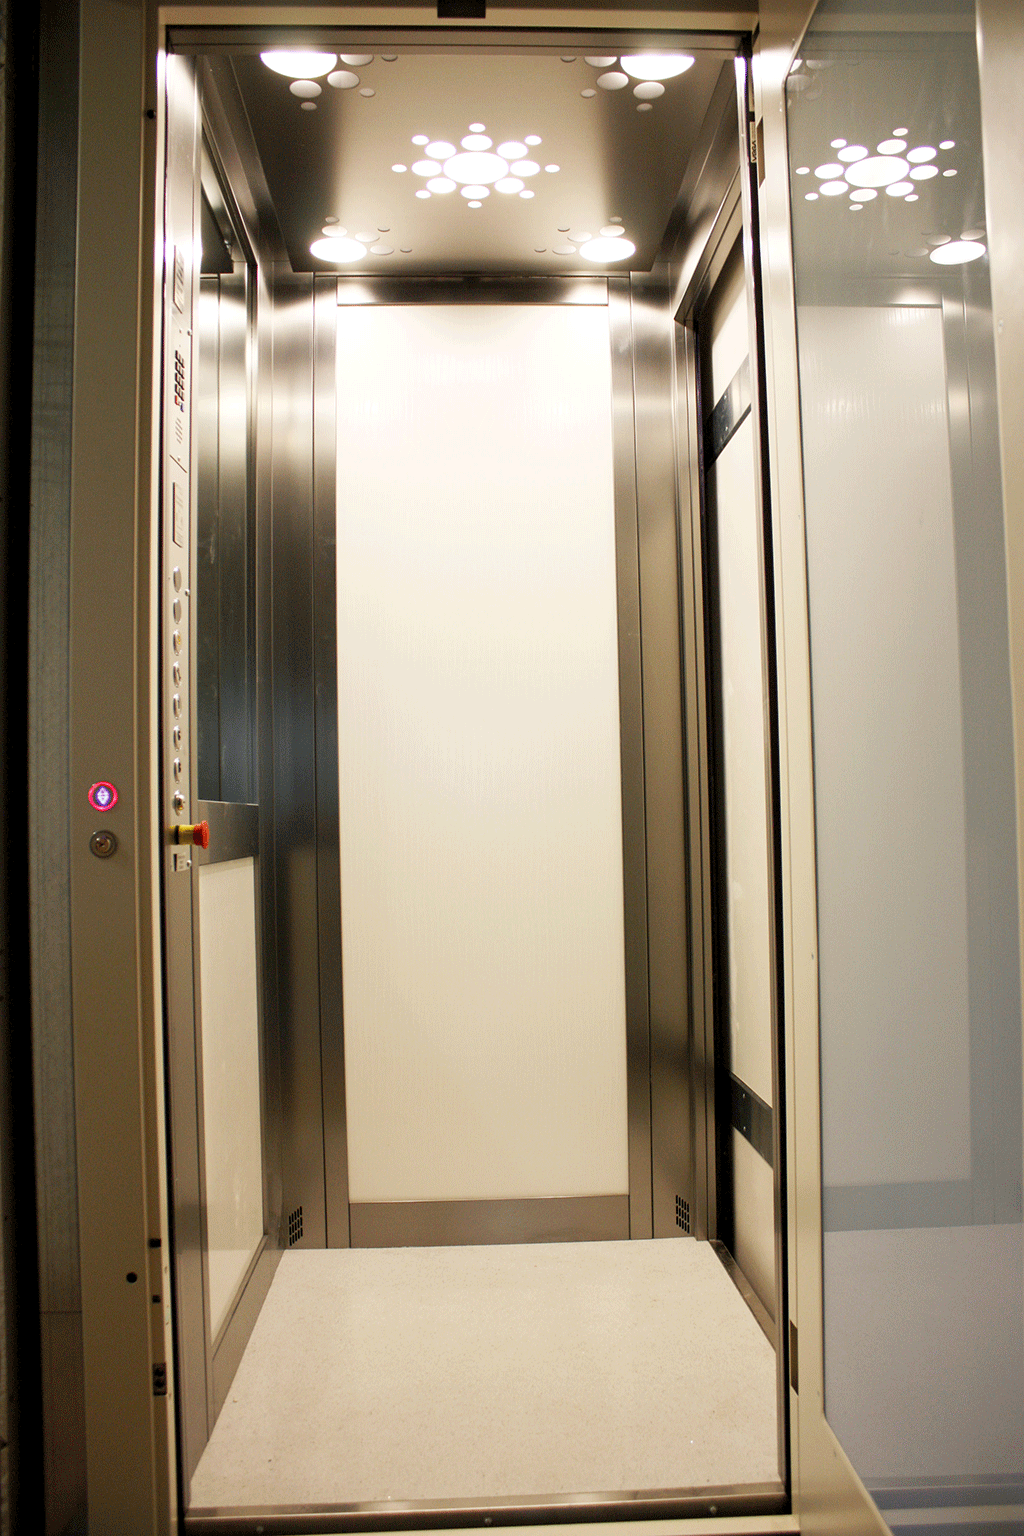 How small can a lift be ?